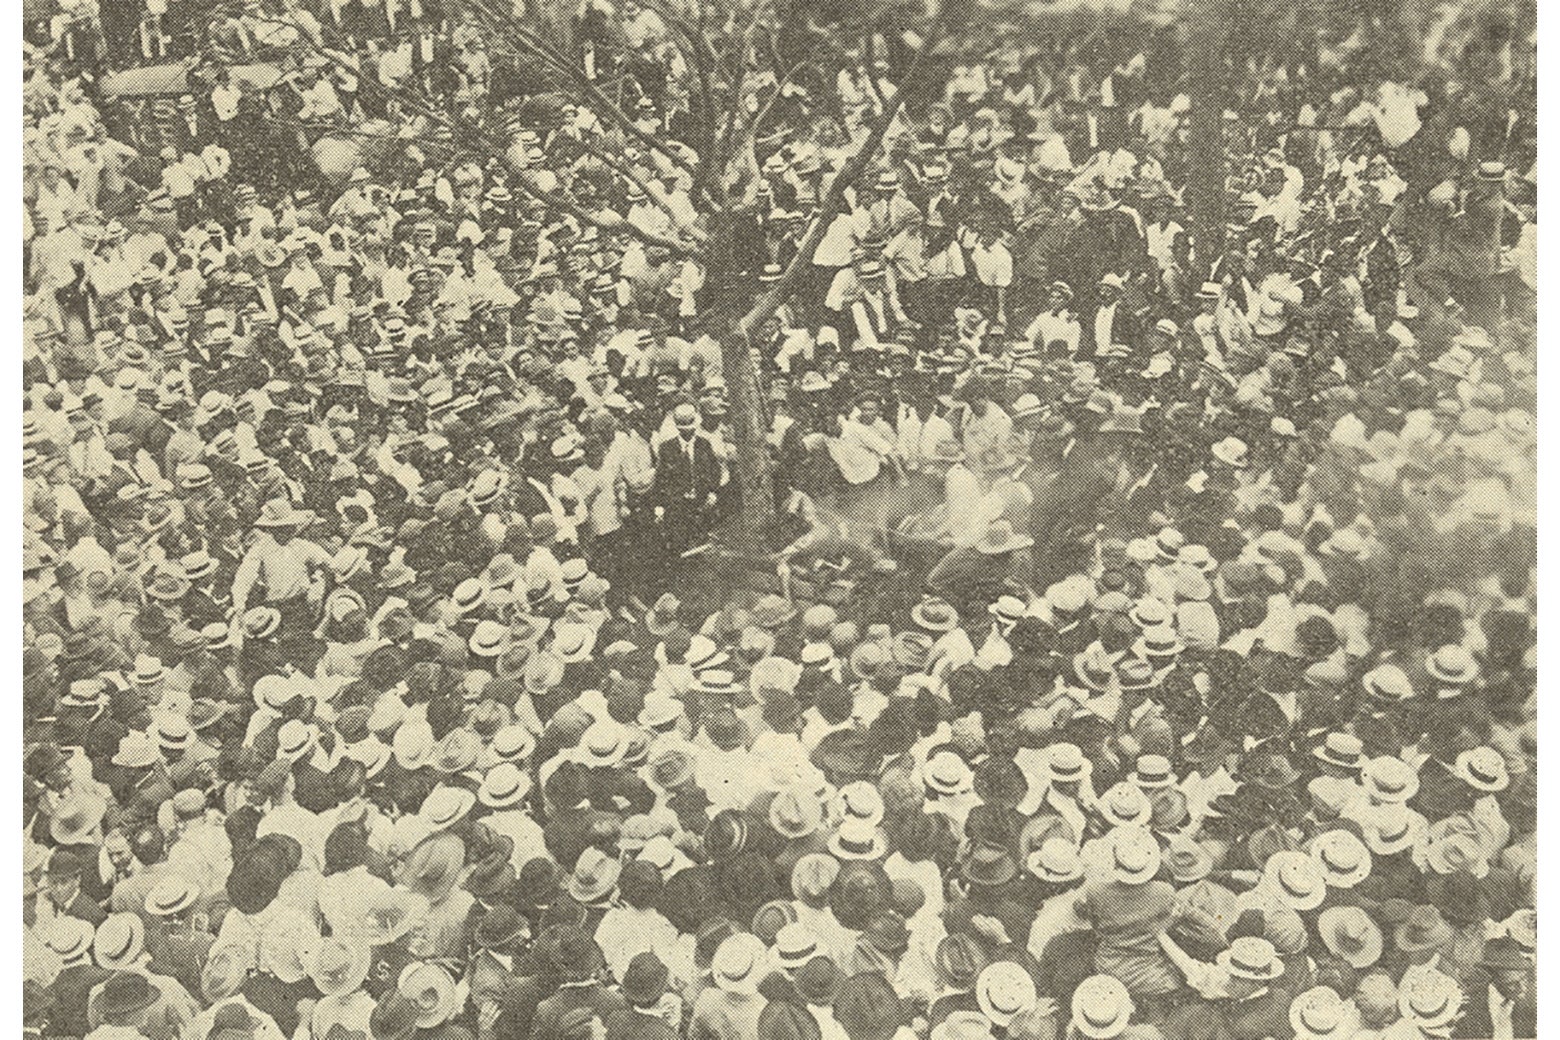 A shot from a high angle of a well-dressed crowd, many wearing straw hats, surrounding Jesse Washington's lynching.